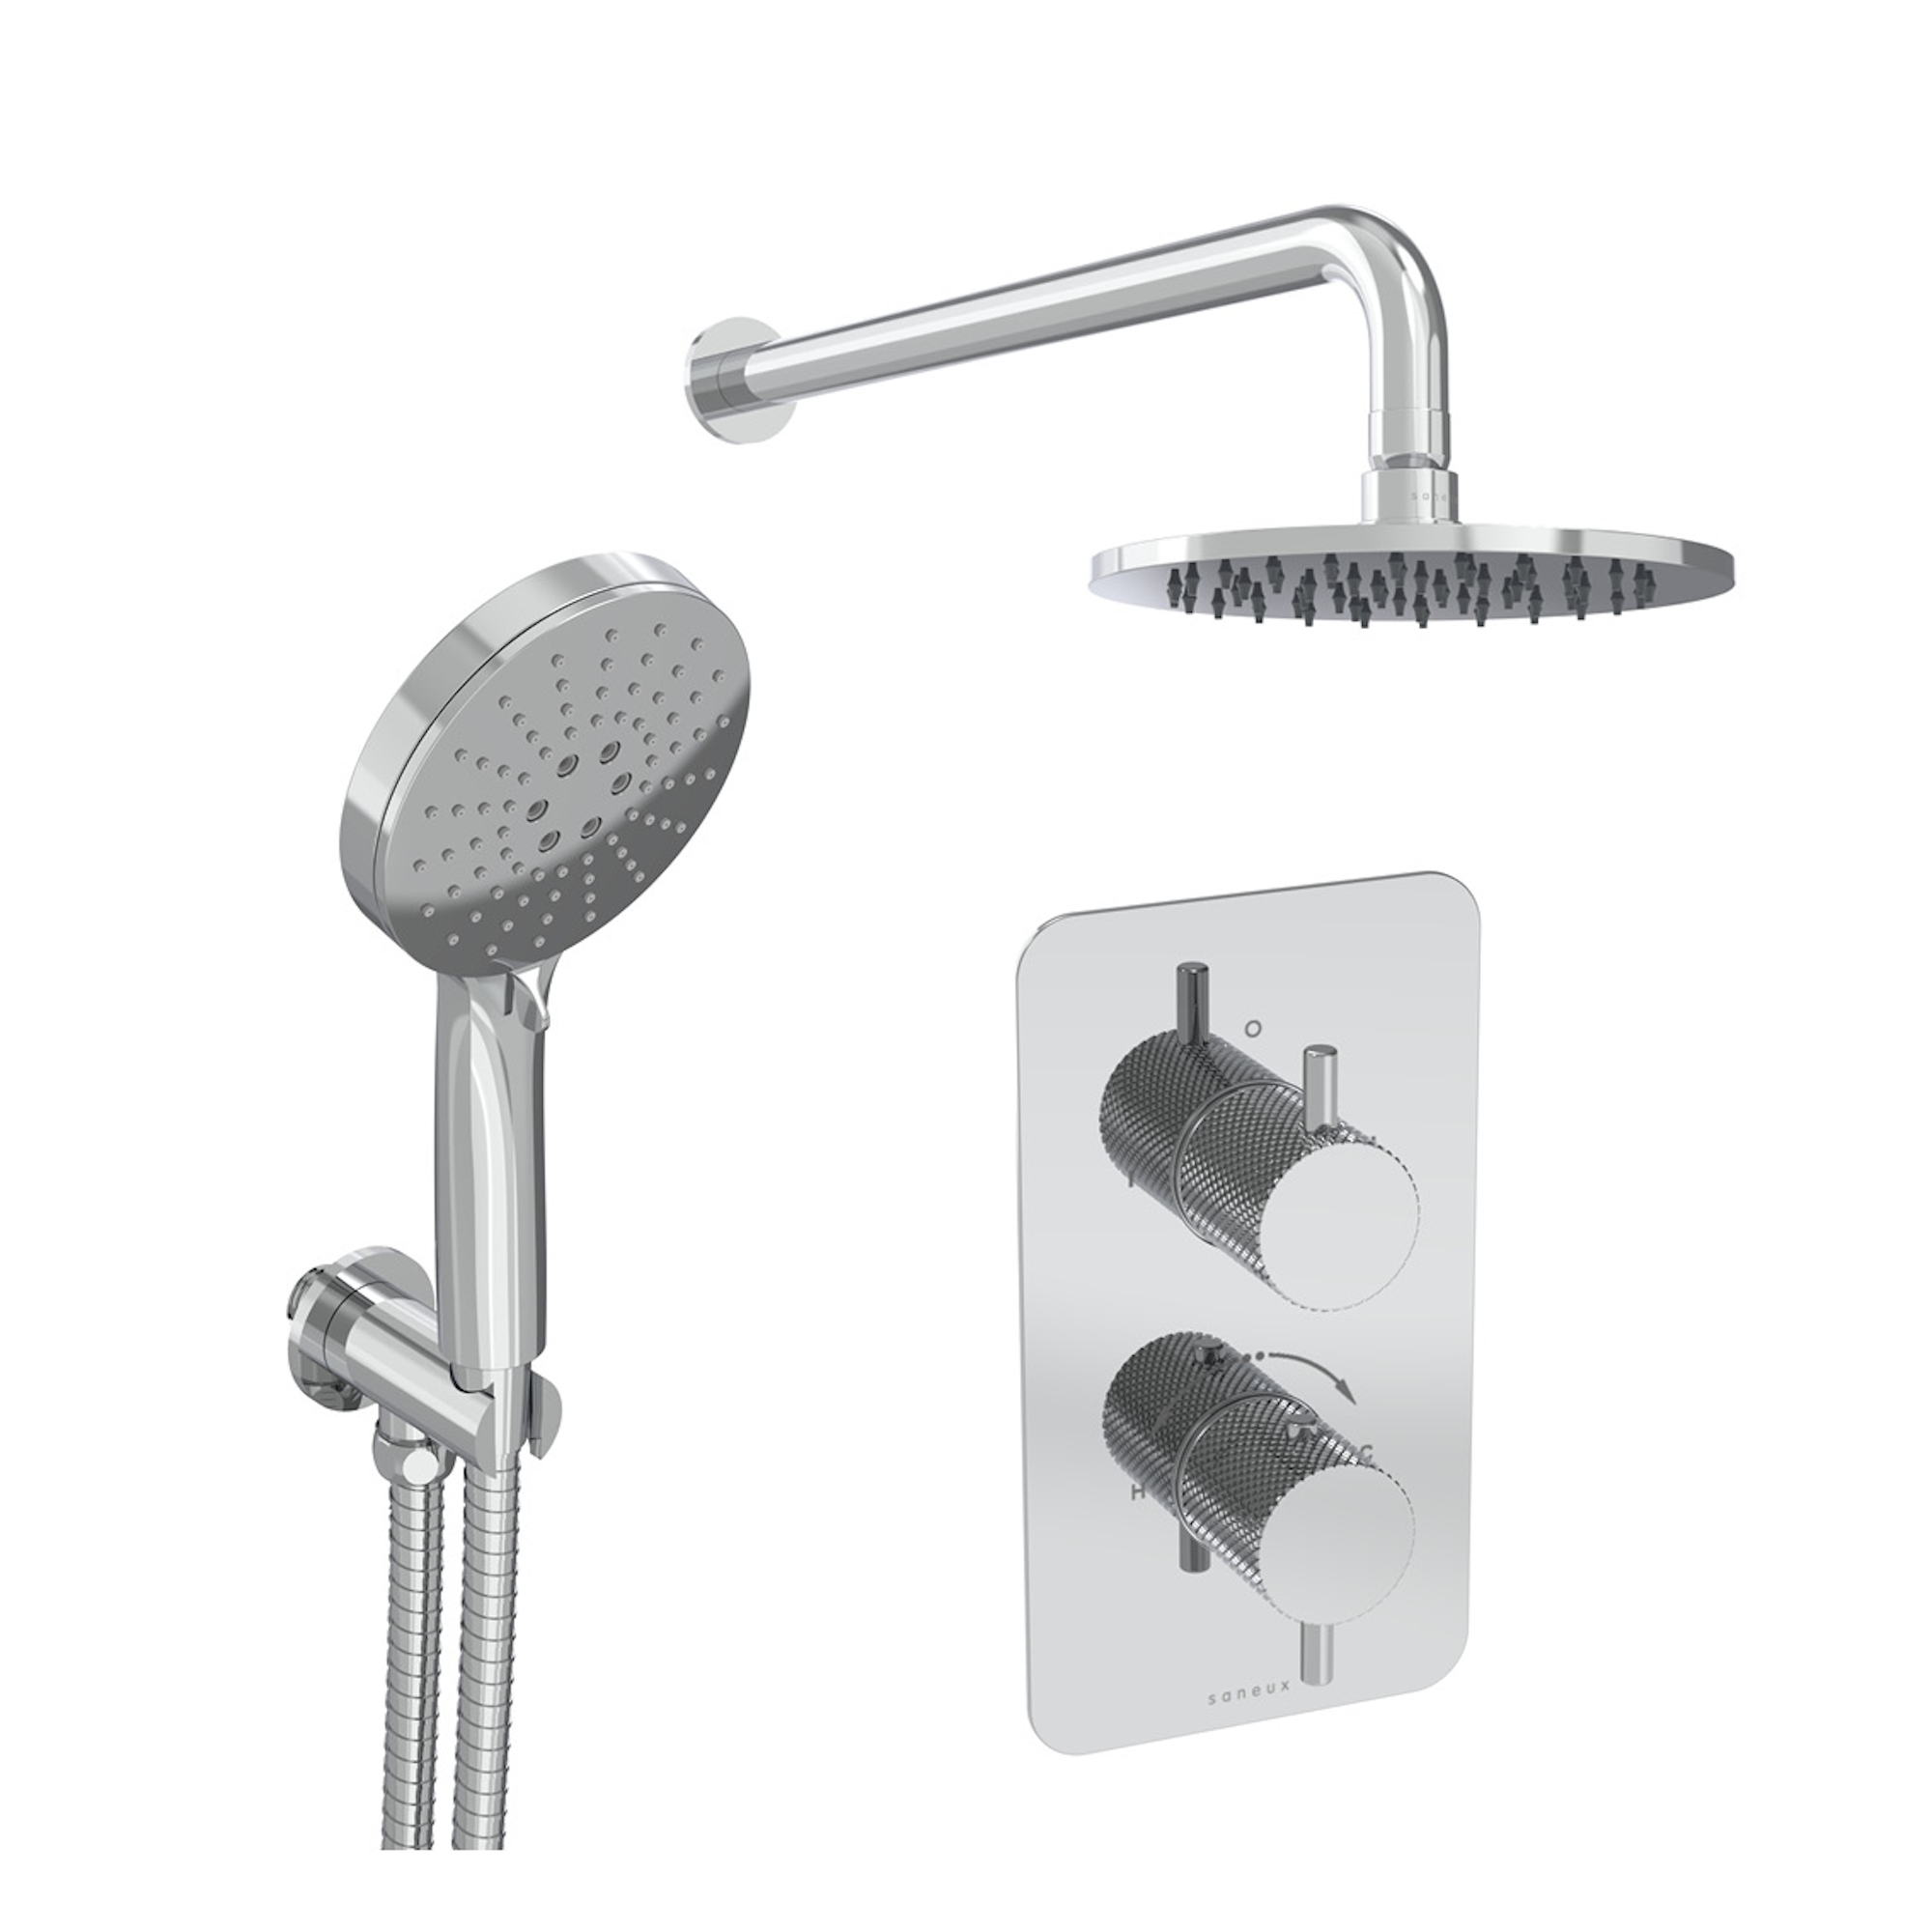 COS 2 way shower kit - w/ 3 Function Handset & Shower Head - Knurled - Chrome